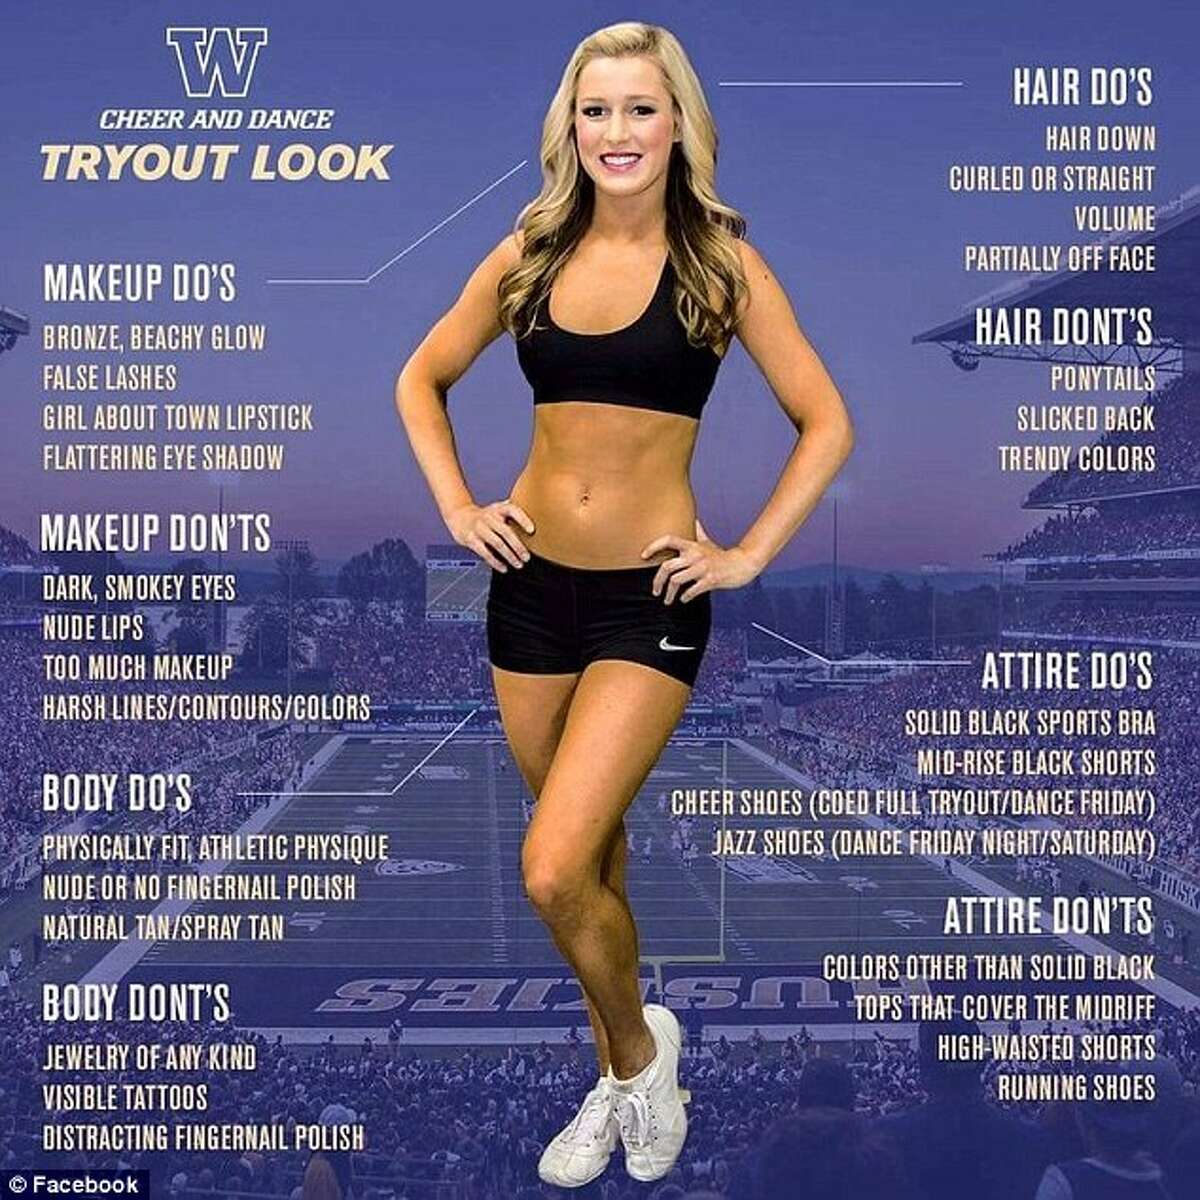 University of Washington cheerleaders are having to play defense after a checklist for tryouts received backlash across the Internet. Click the gallery to see the uniforms of cheerleaders at other universities.